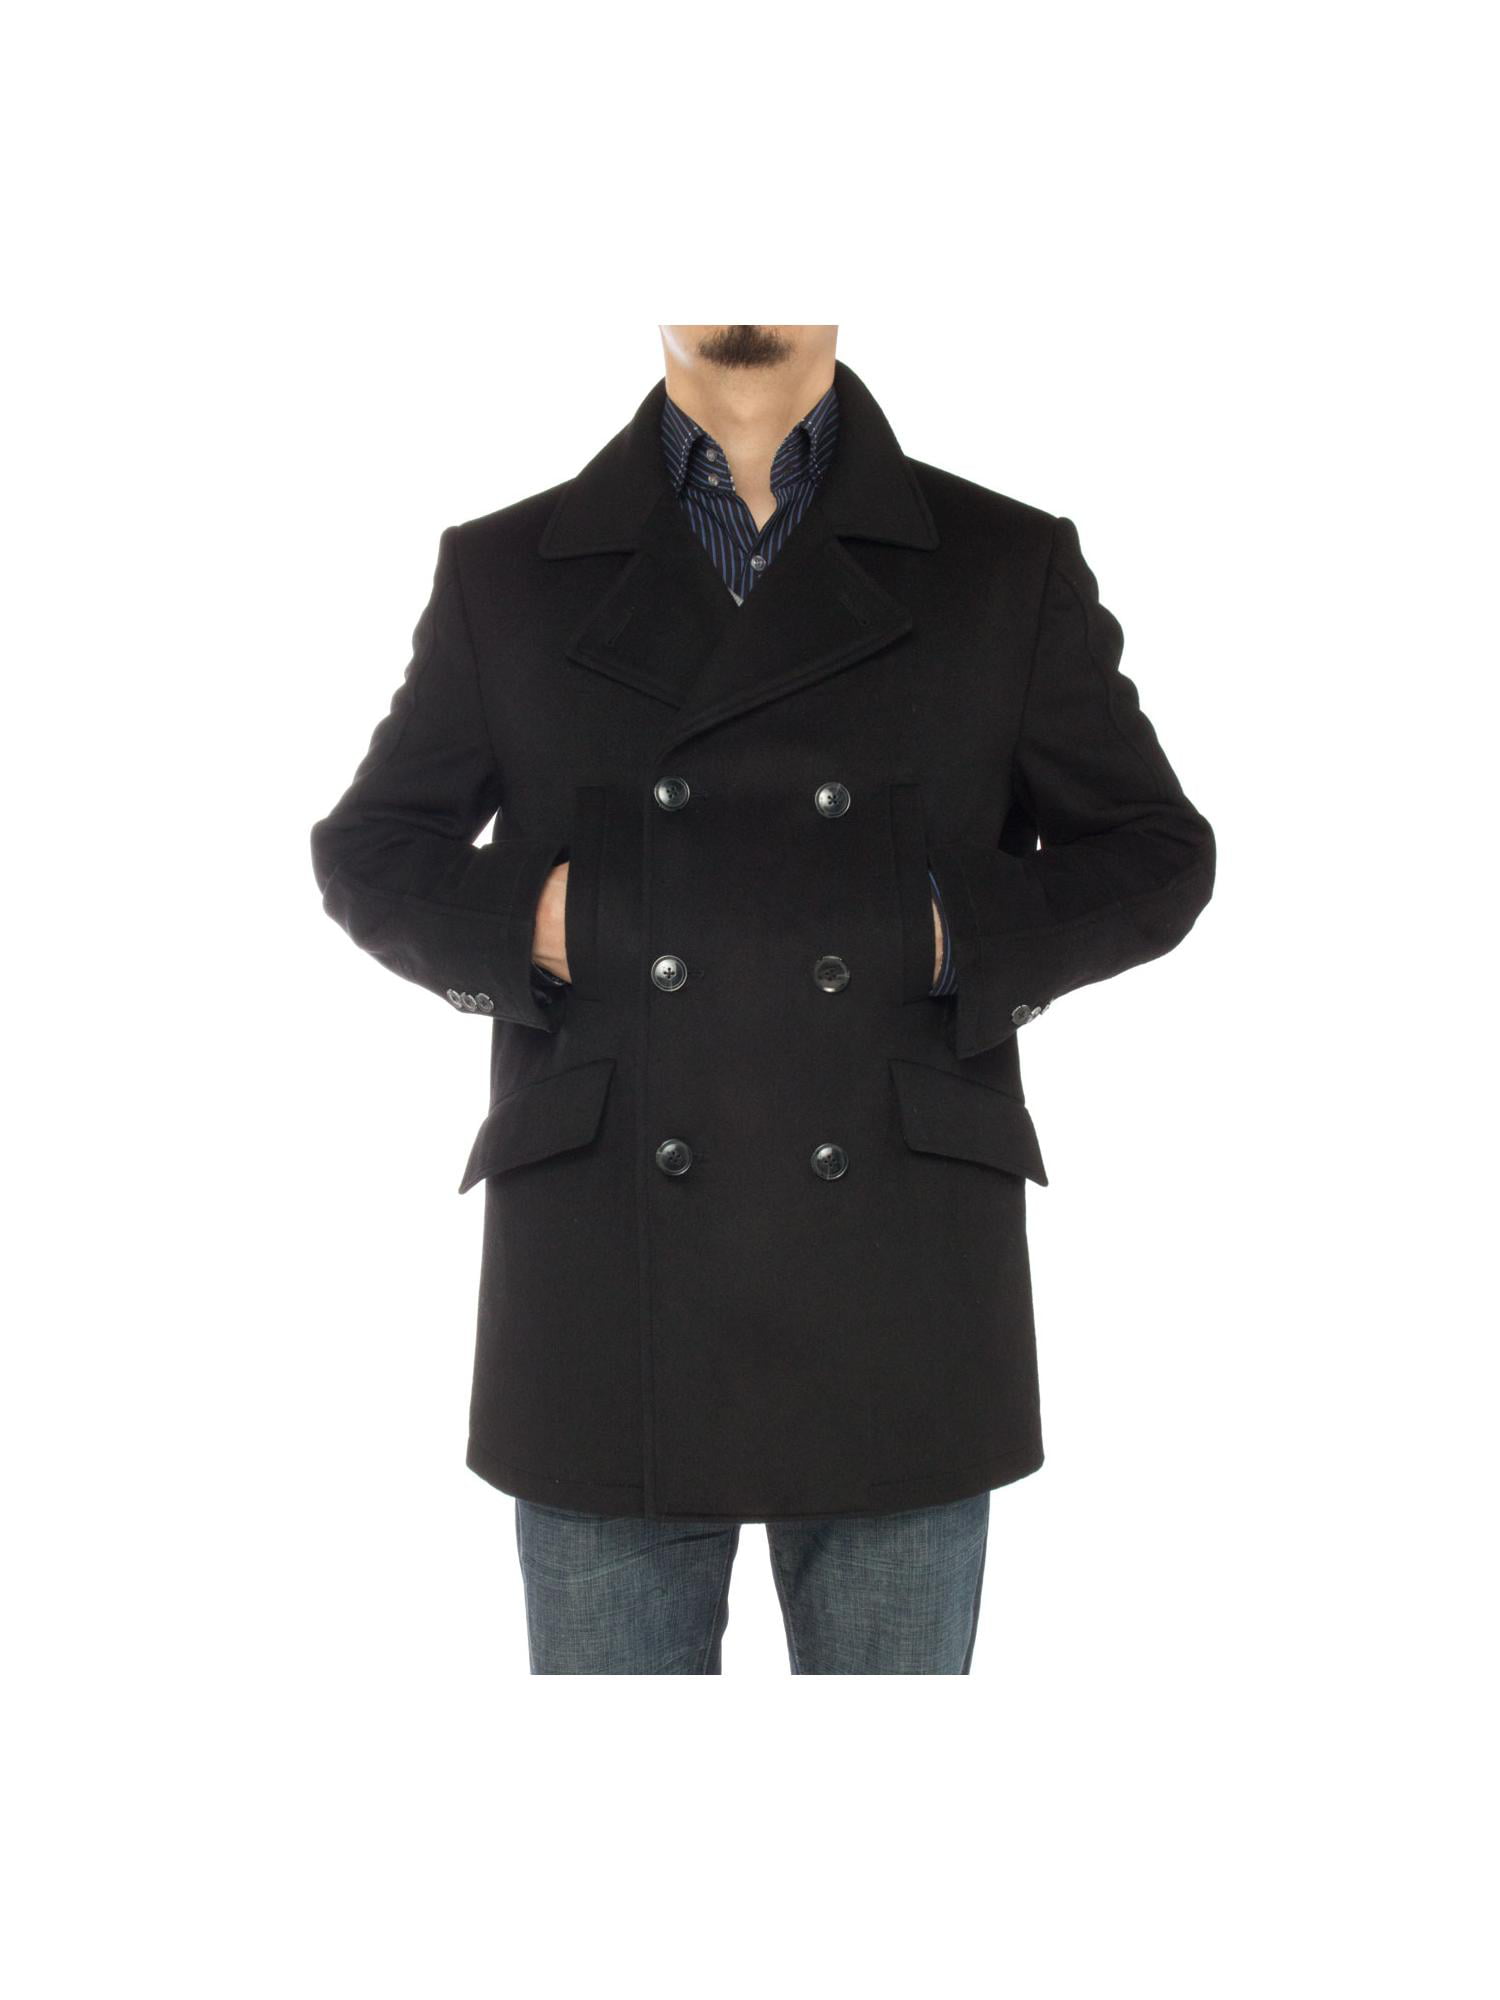 LN LUCIANO NATAZZI Mens Wool Double Breasted Top Coat